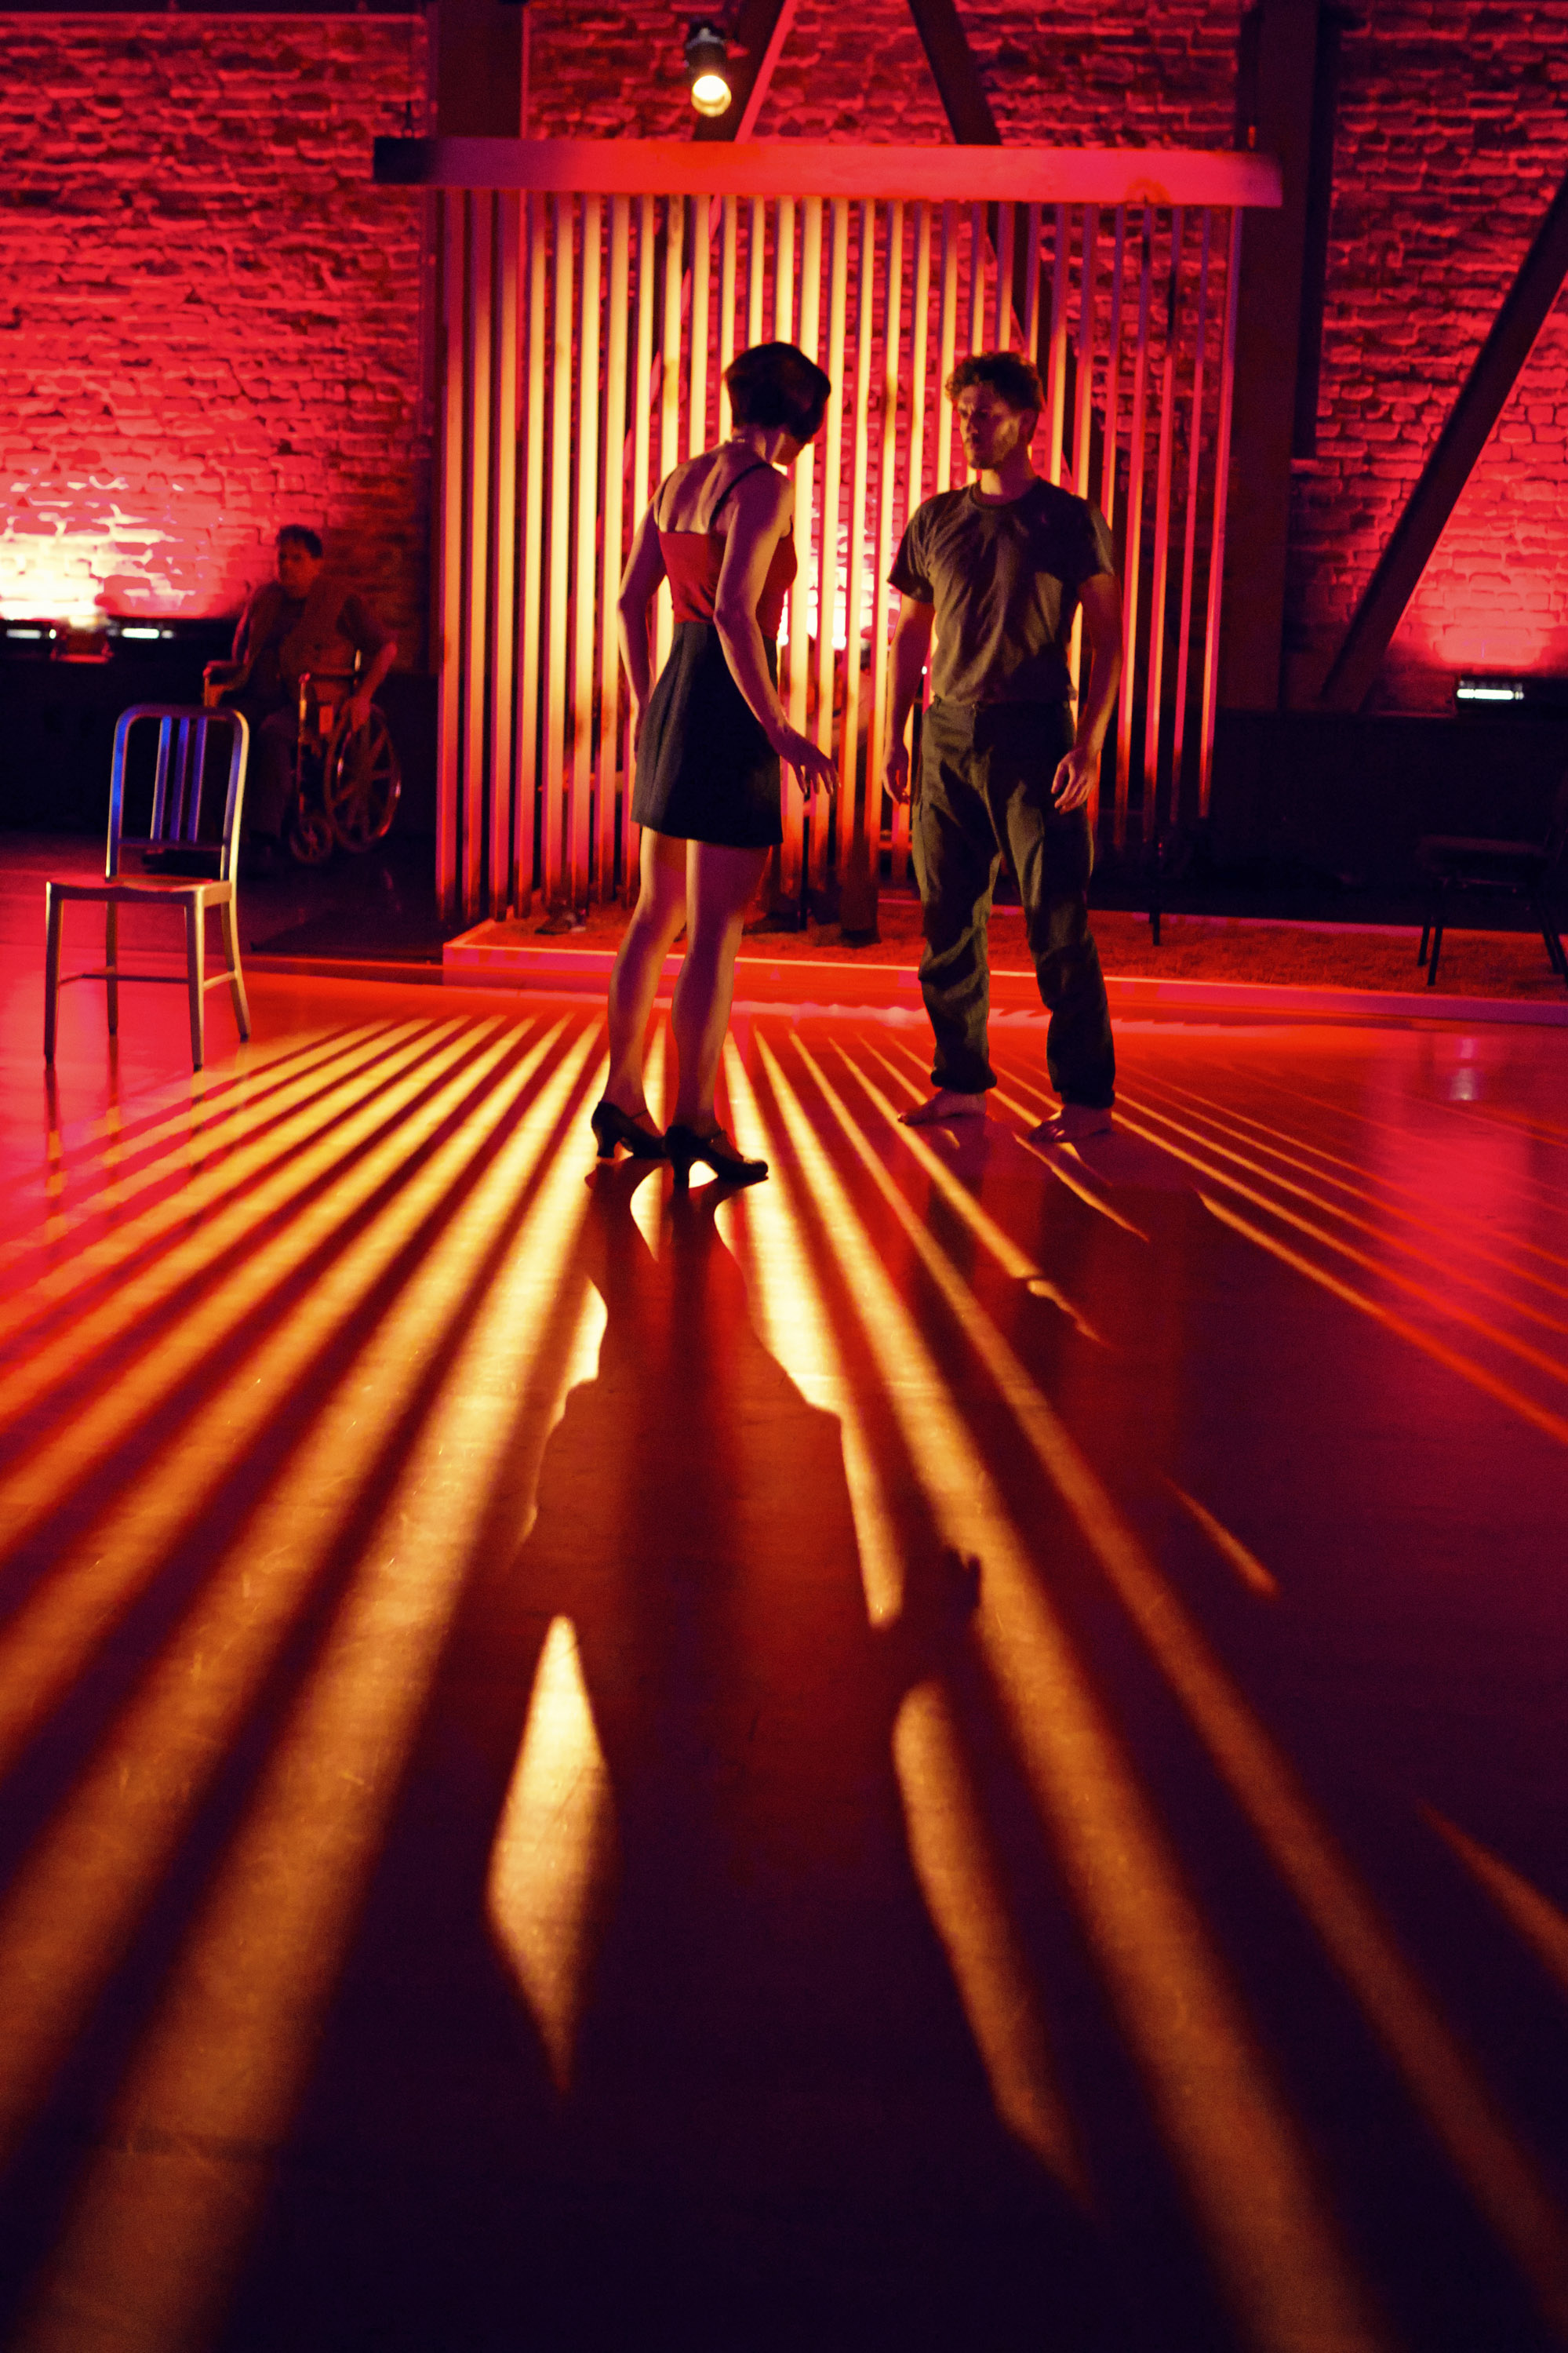 private-life-allen-willner-lighting-two-people-red.jpg